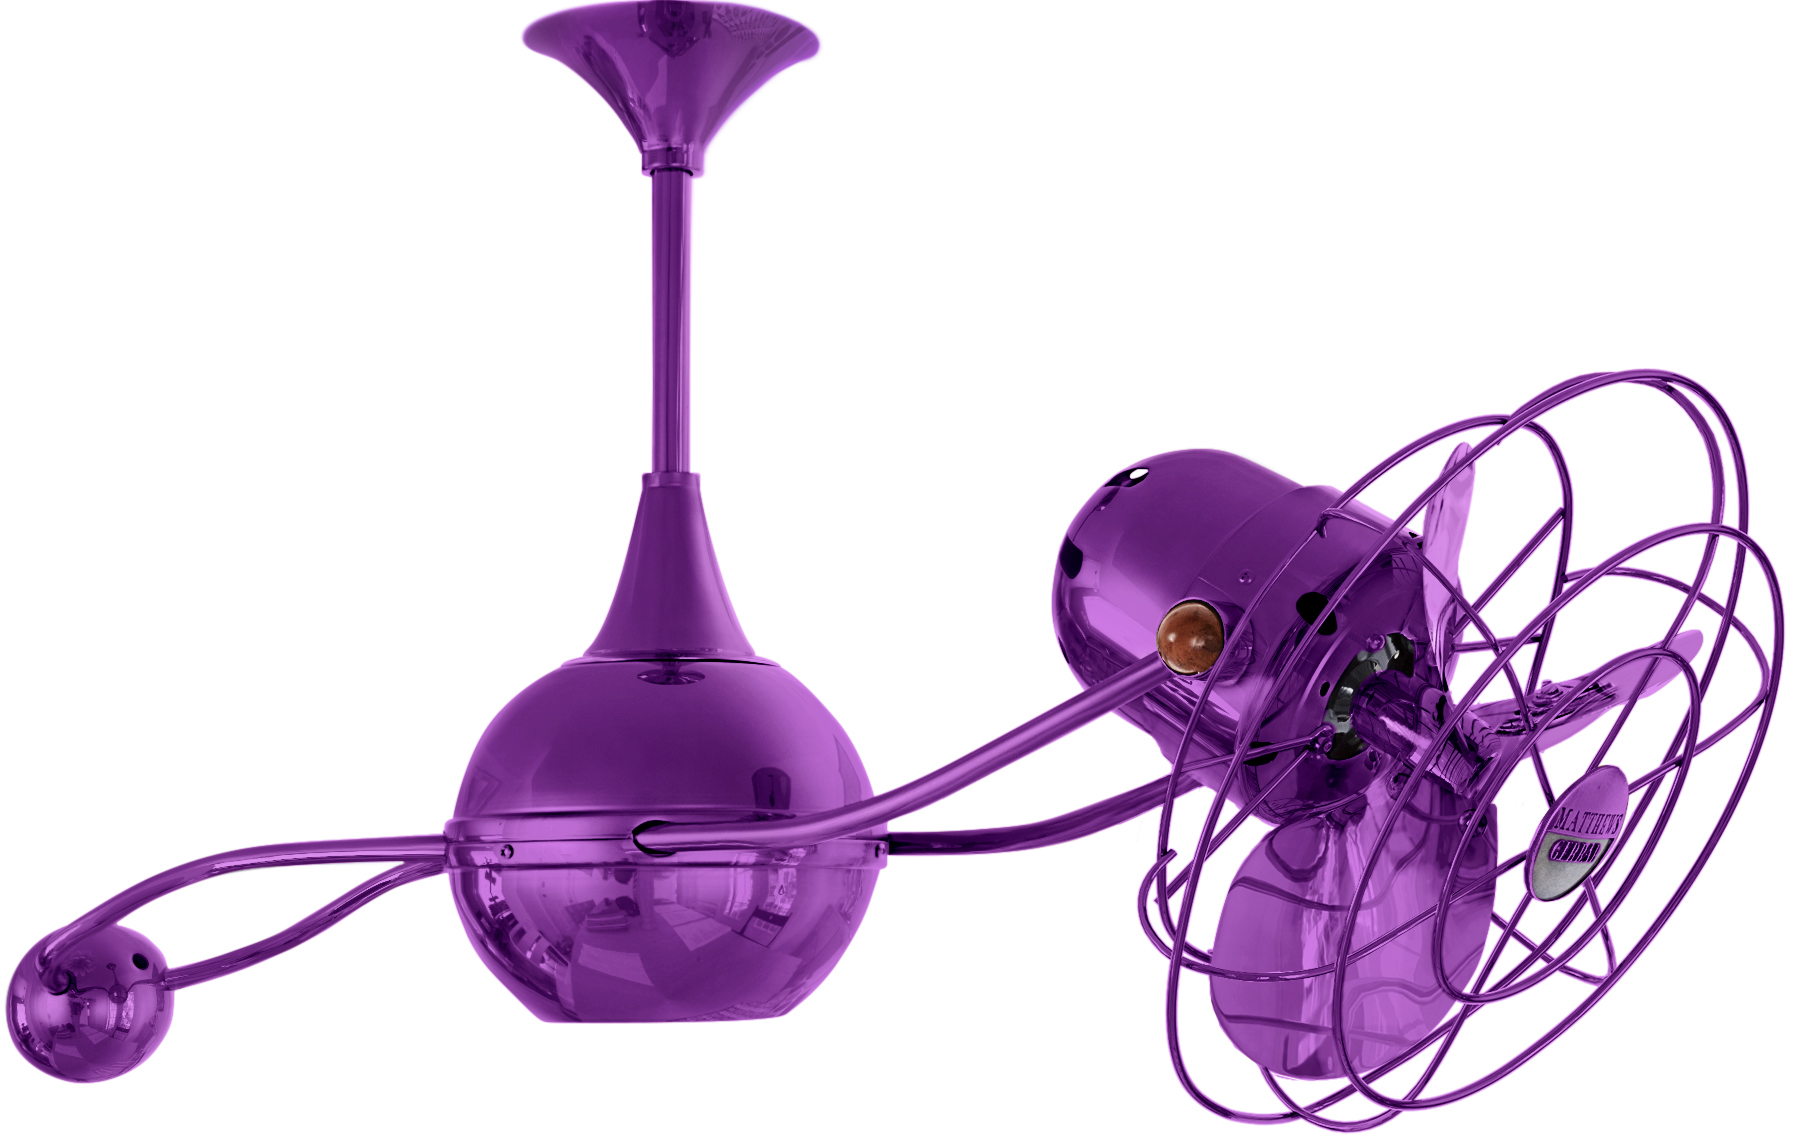 Brisa 2000 ceiling fan in purple / ametista finish with metal blades in decorative cage made by Matthews Fan Company.